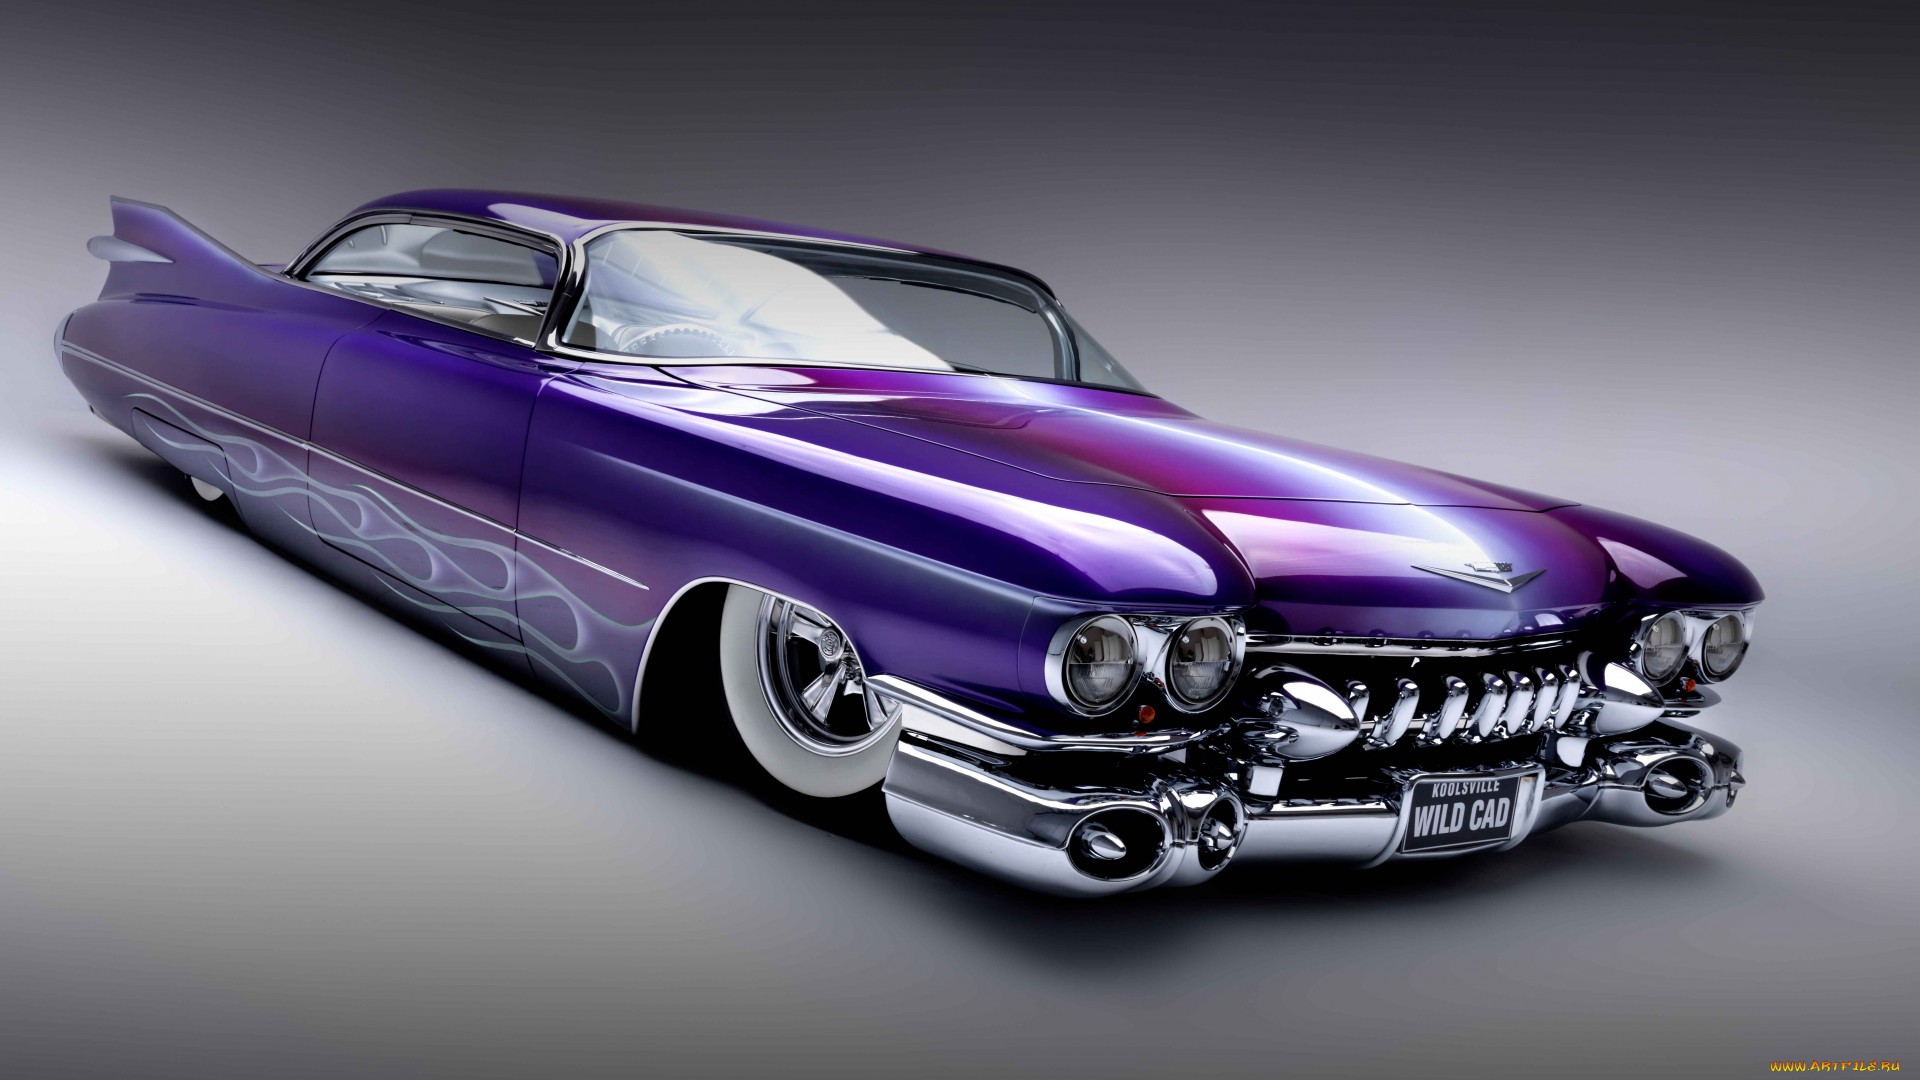 Lowrider Car Wallpaper Image Amp Pictures Becuo